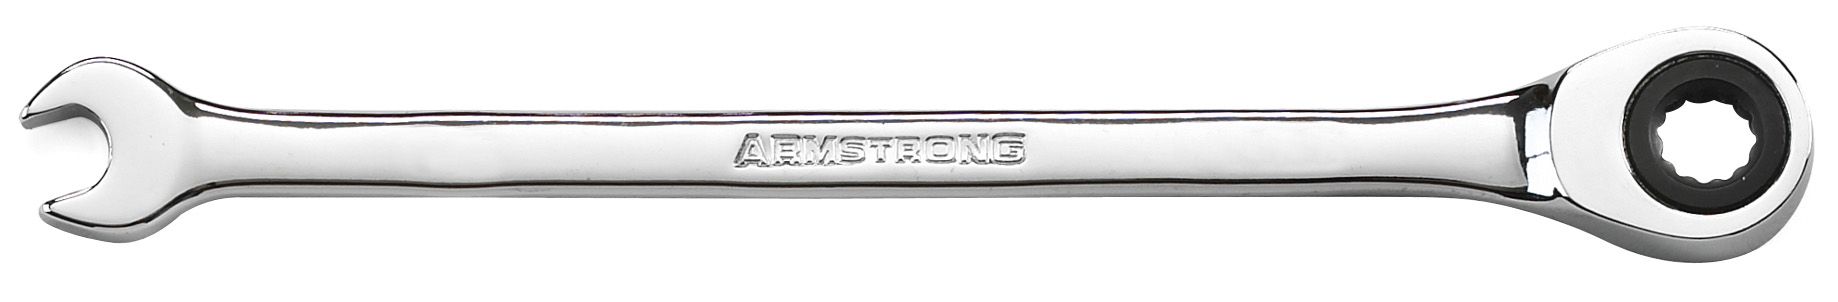 Armstrong 18 mm 12 pt. Long Combination Ratcheting Wrench Metric